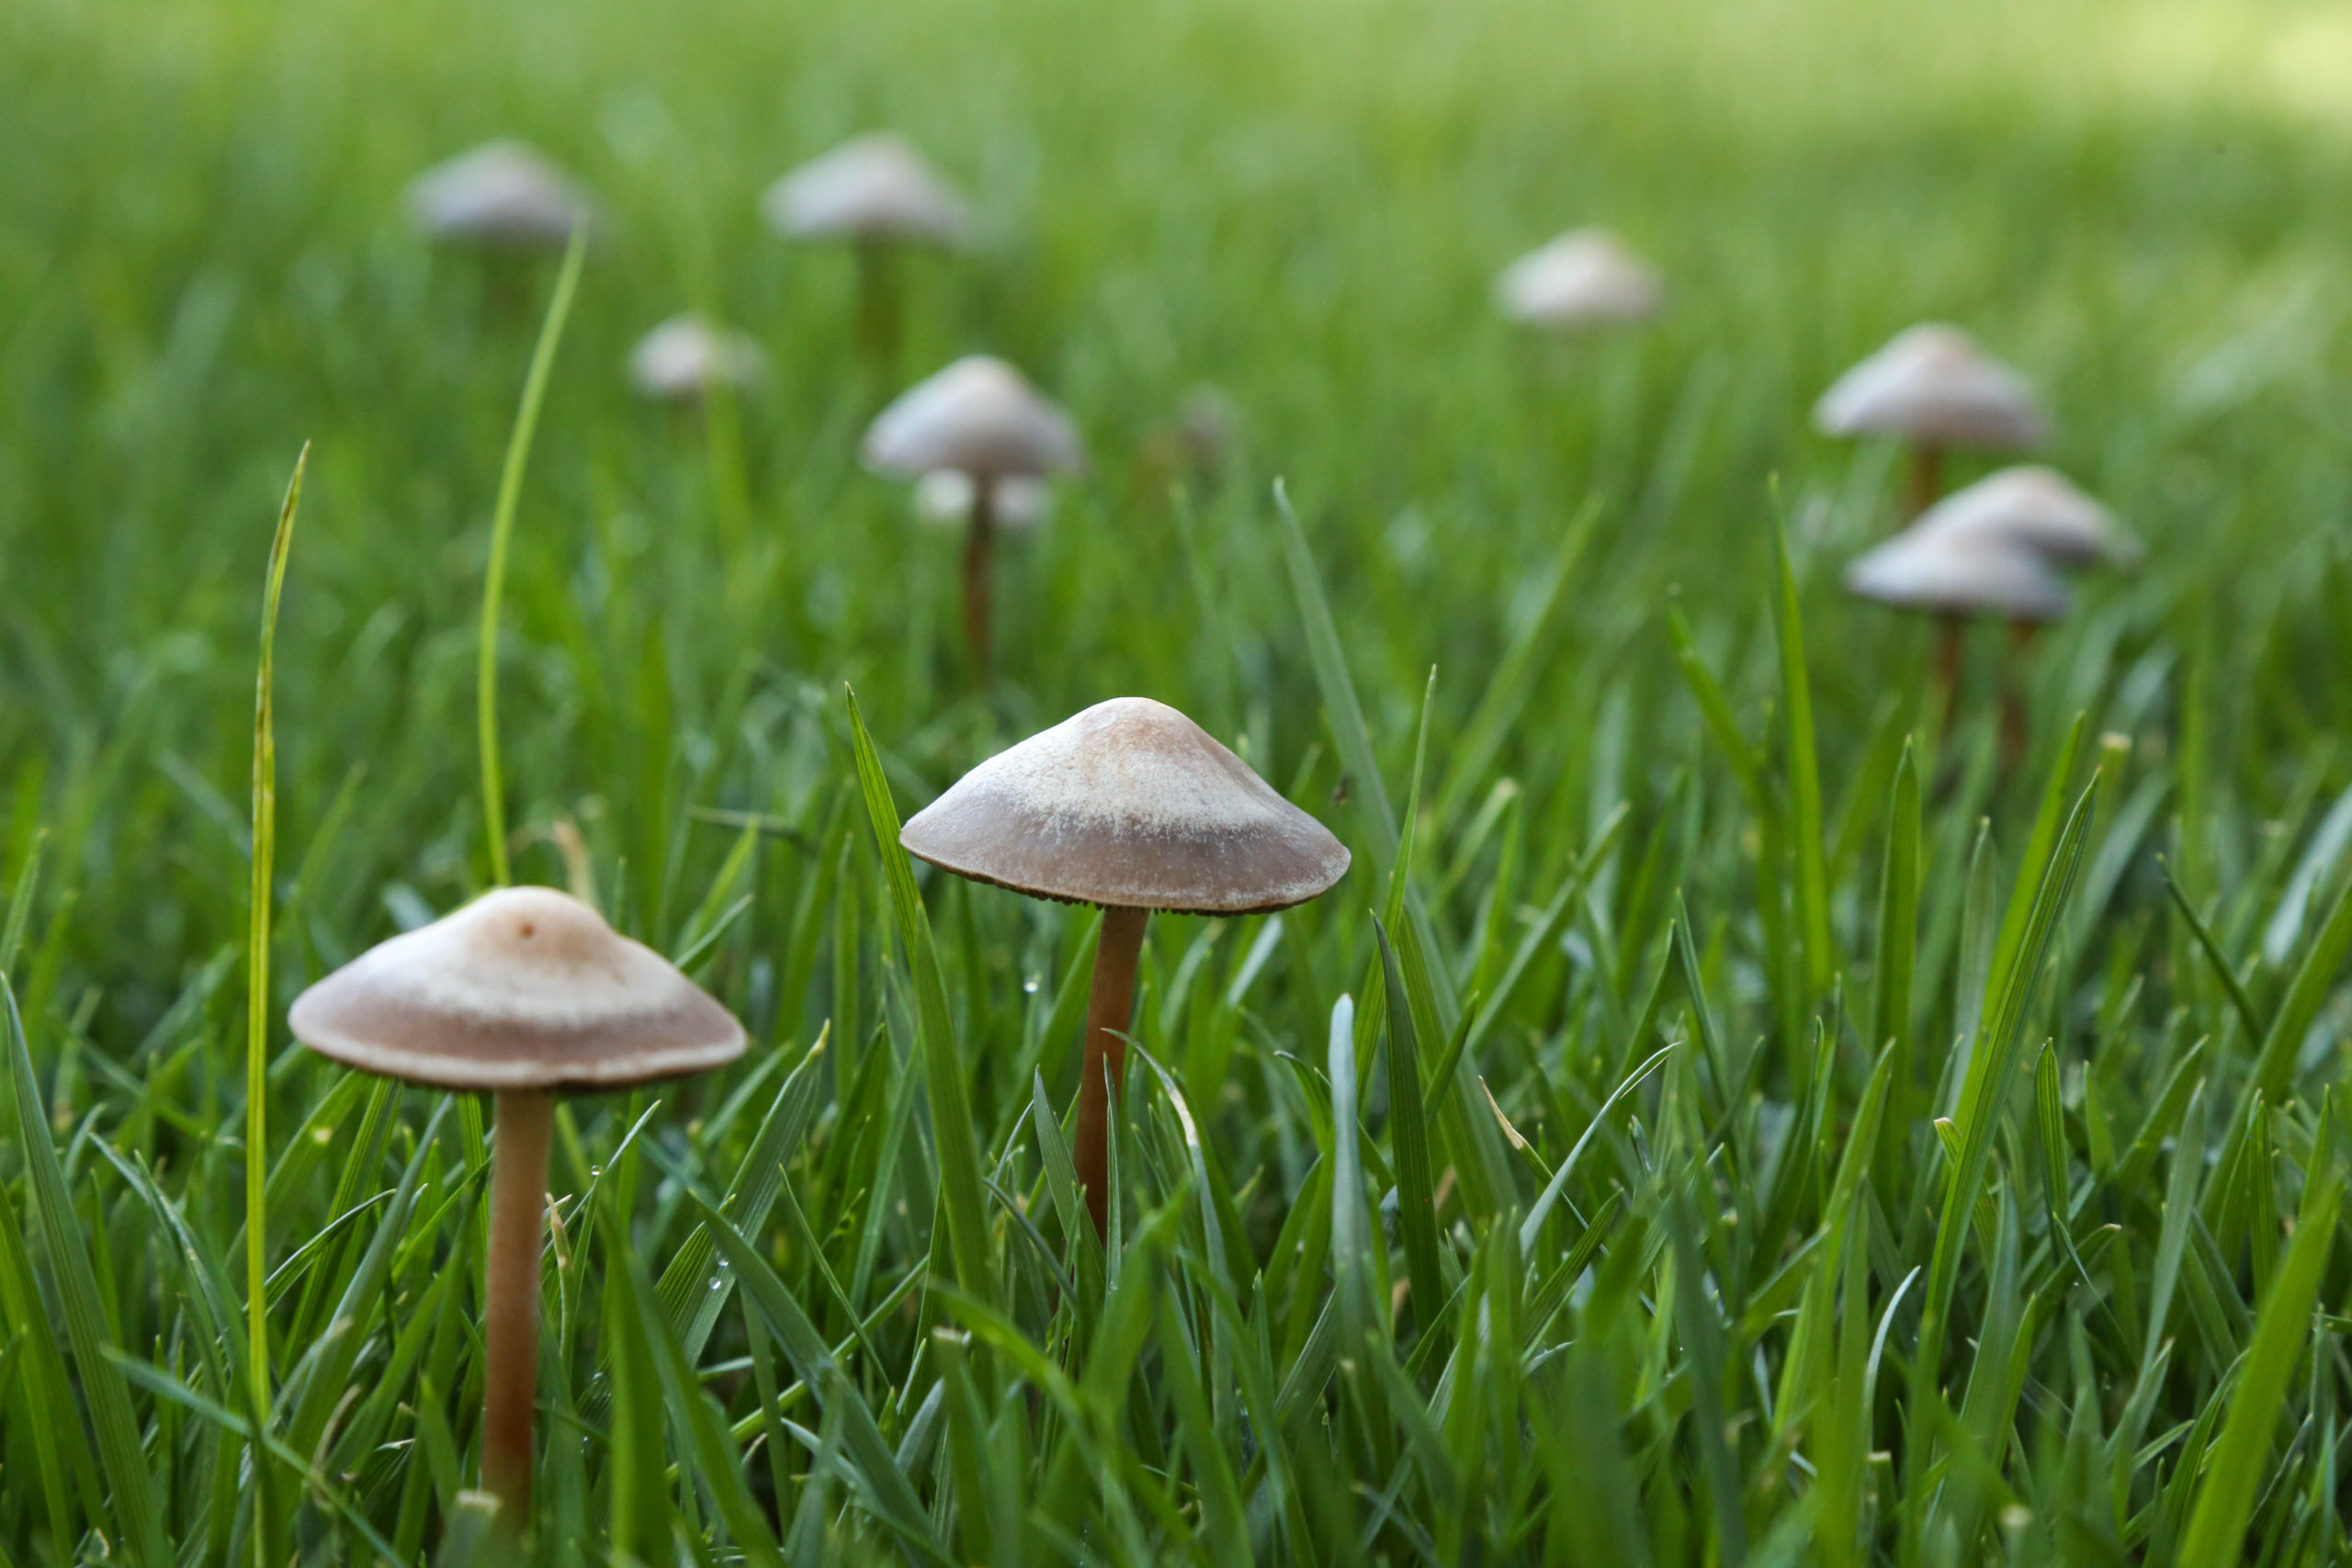 Virginia: Bill To Decriminalize Psilocybin Draws Early Support From Lawmakers